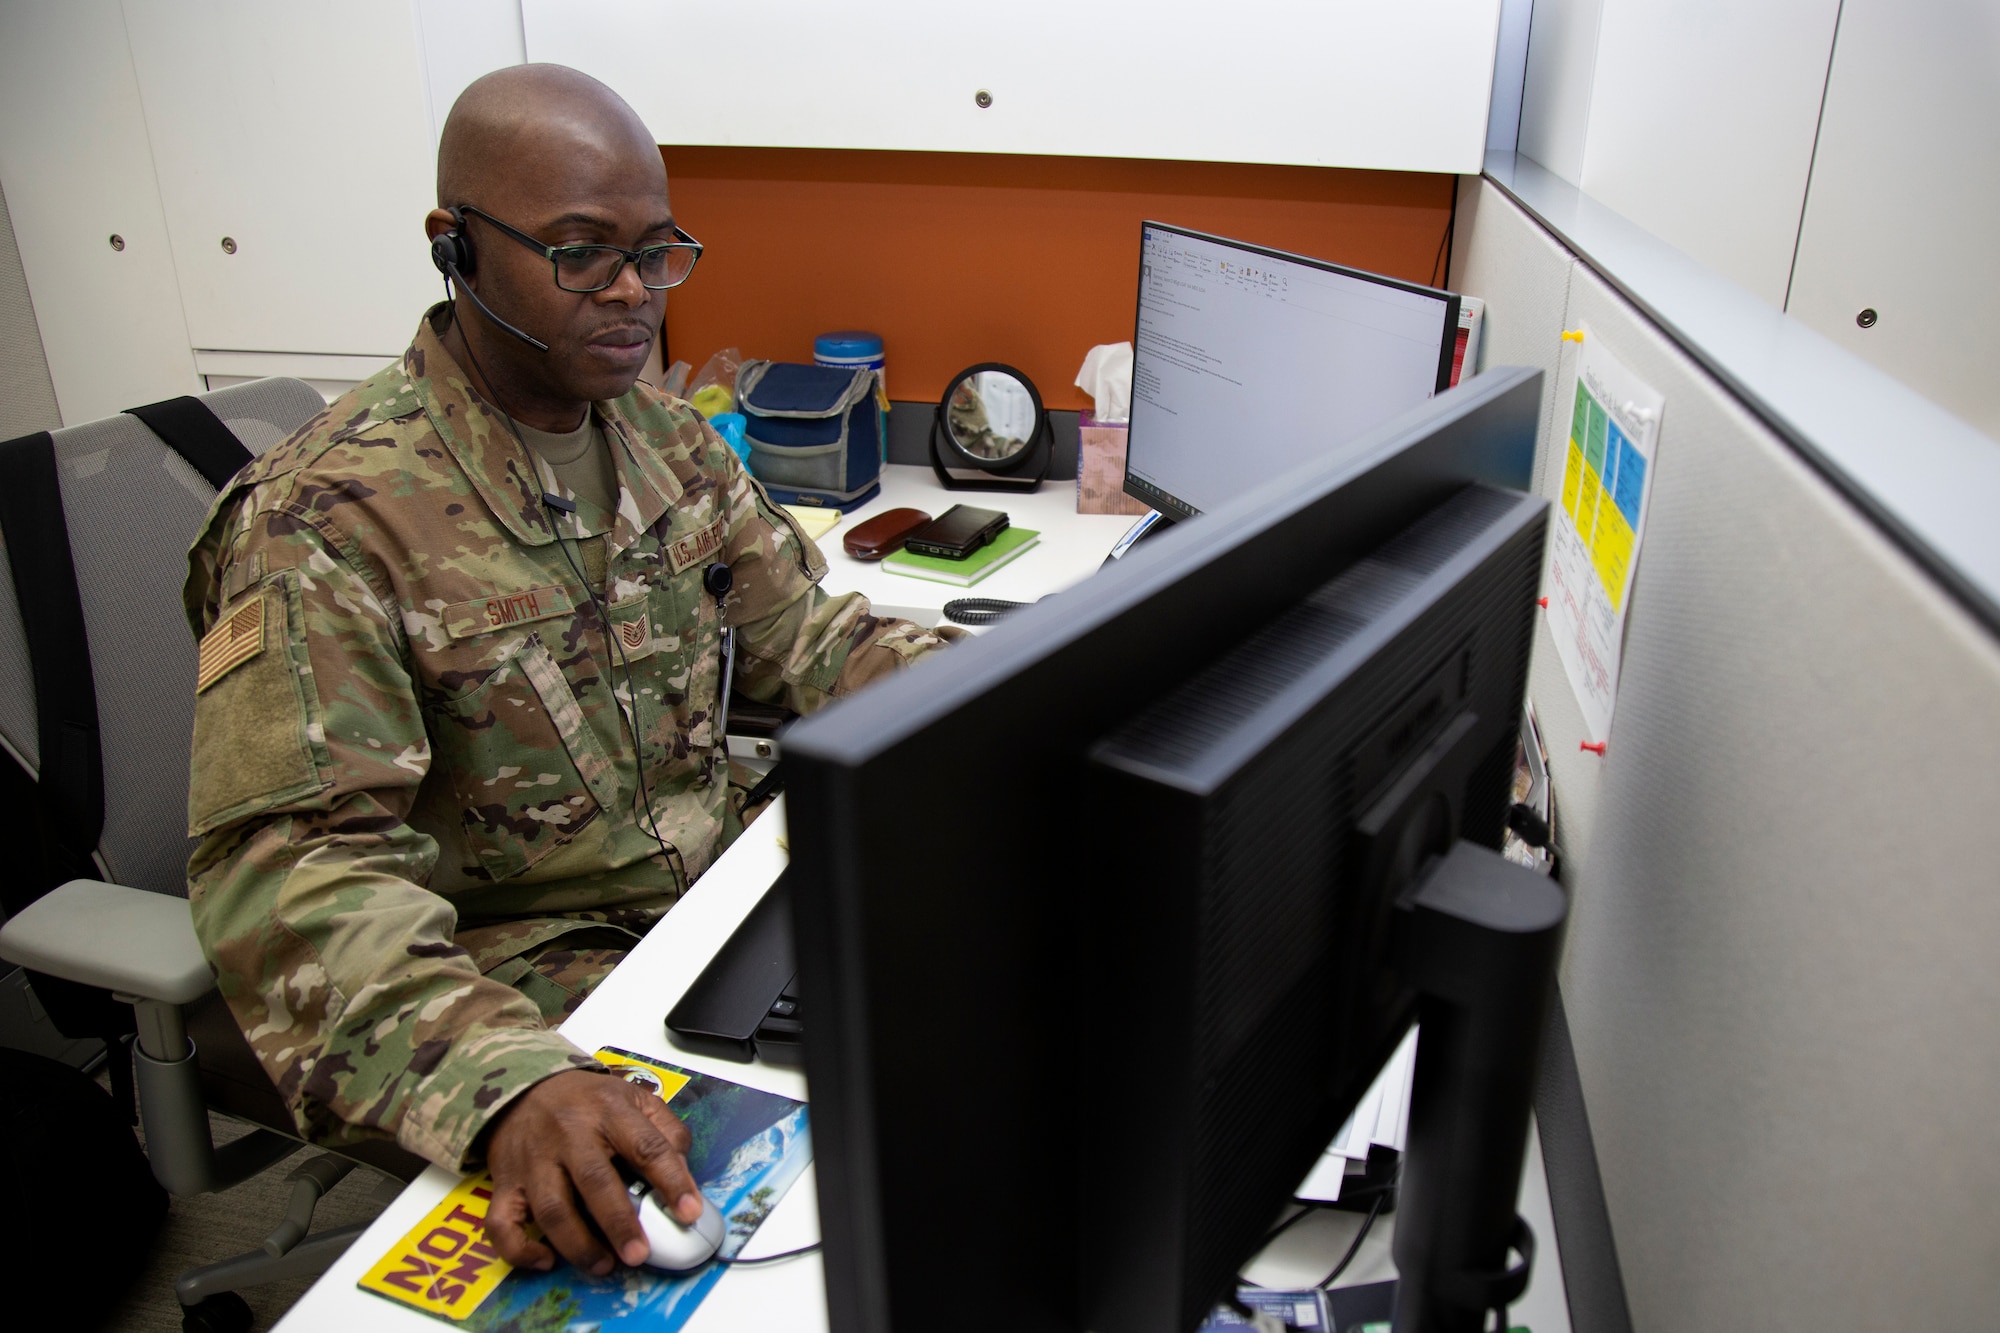 Tech. Sgt. Clayton Smith, a medical resources noncommissioned officer assigned to the Office of the Joint Surgeon at the National Guard Bureau, participates in a phone conference at the Herbert R. Temple Jr. Army National Guard Readiness Center, Arlington Hall Station, Arlington, Va., March 2, 2020. Smith came to the U.S. from Trinidad and Tobago at the age of 26 and enlisted in the Air National Guard to gain real world experience, earning U.S. citizenship along the way.